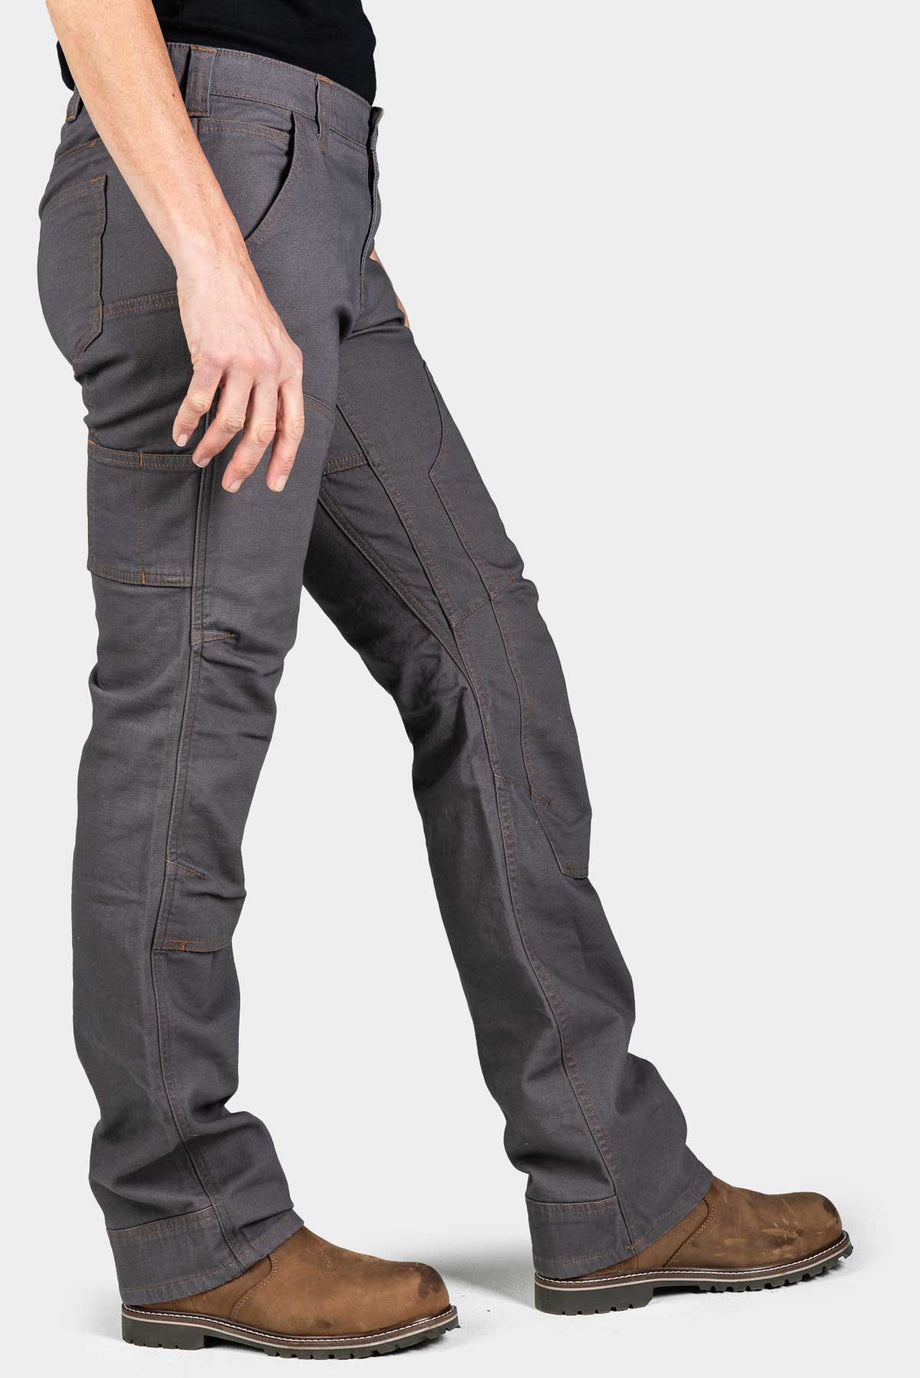 Dovetail Workwear Women's Grey Canvas Work Pants (16 X 30) in the Pants  department at